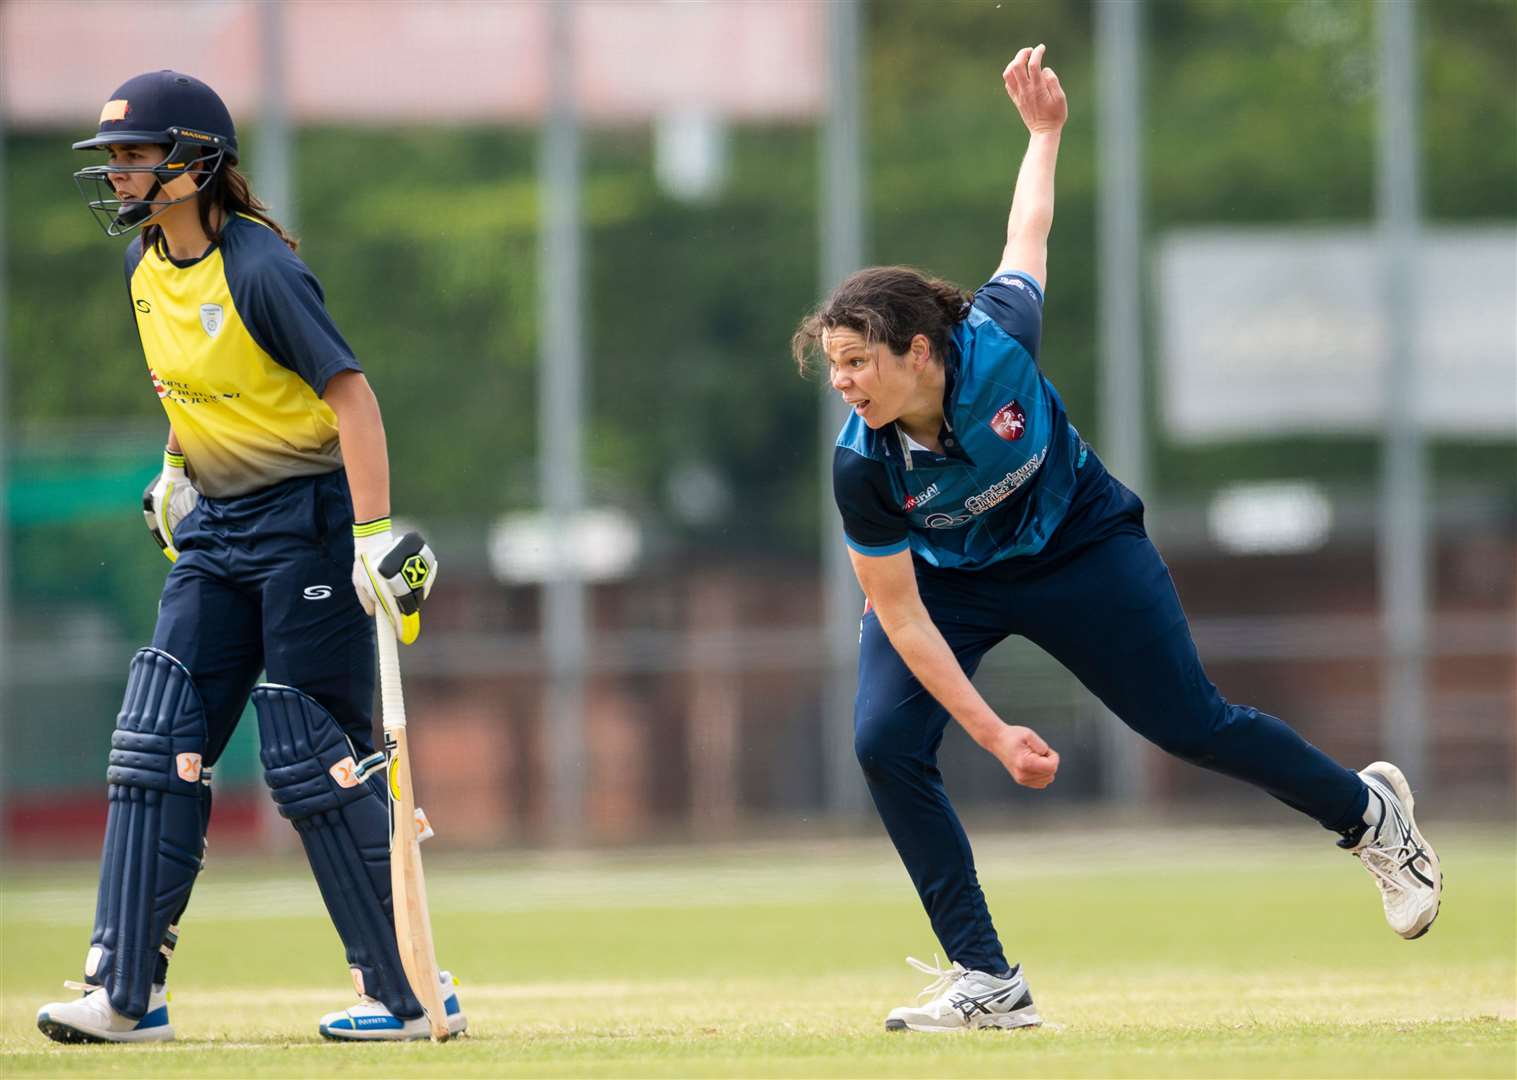 Alice Davidson-Richards has won five women’s county championships and three national T20 titles to date with Kent Picture: Ady Kerry